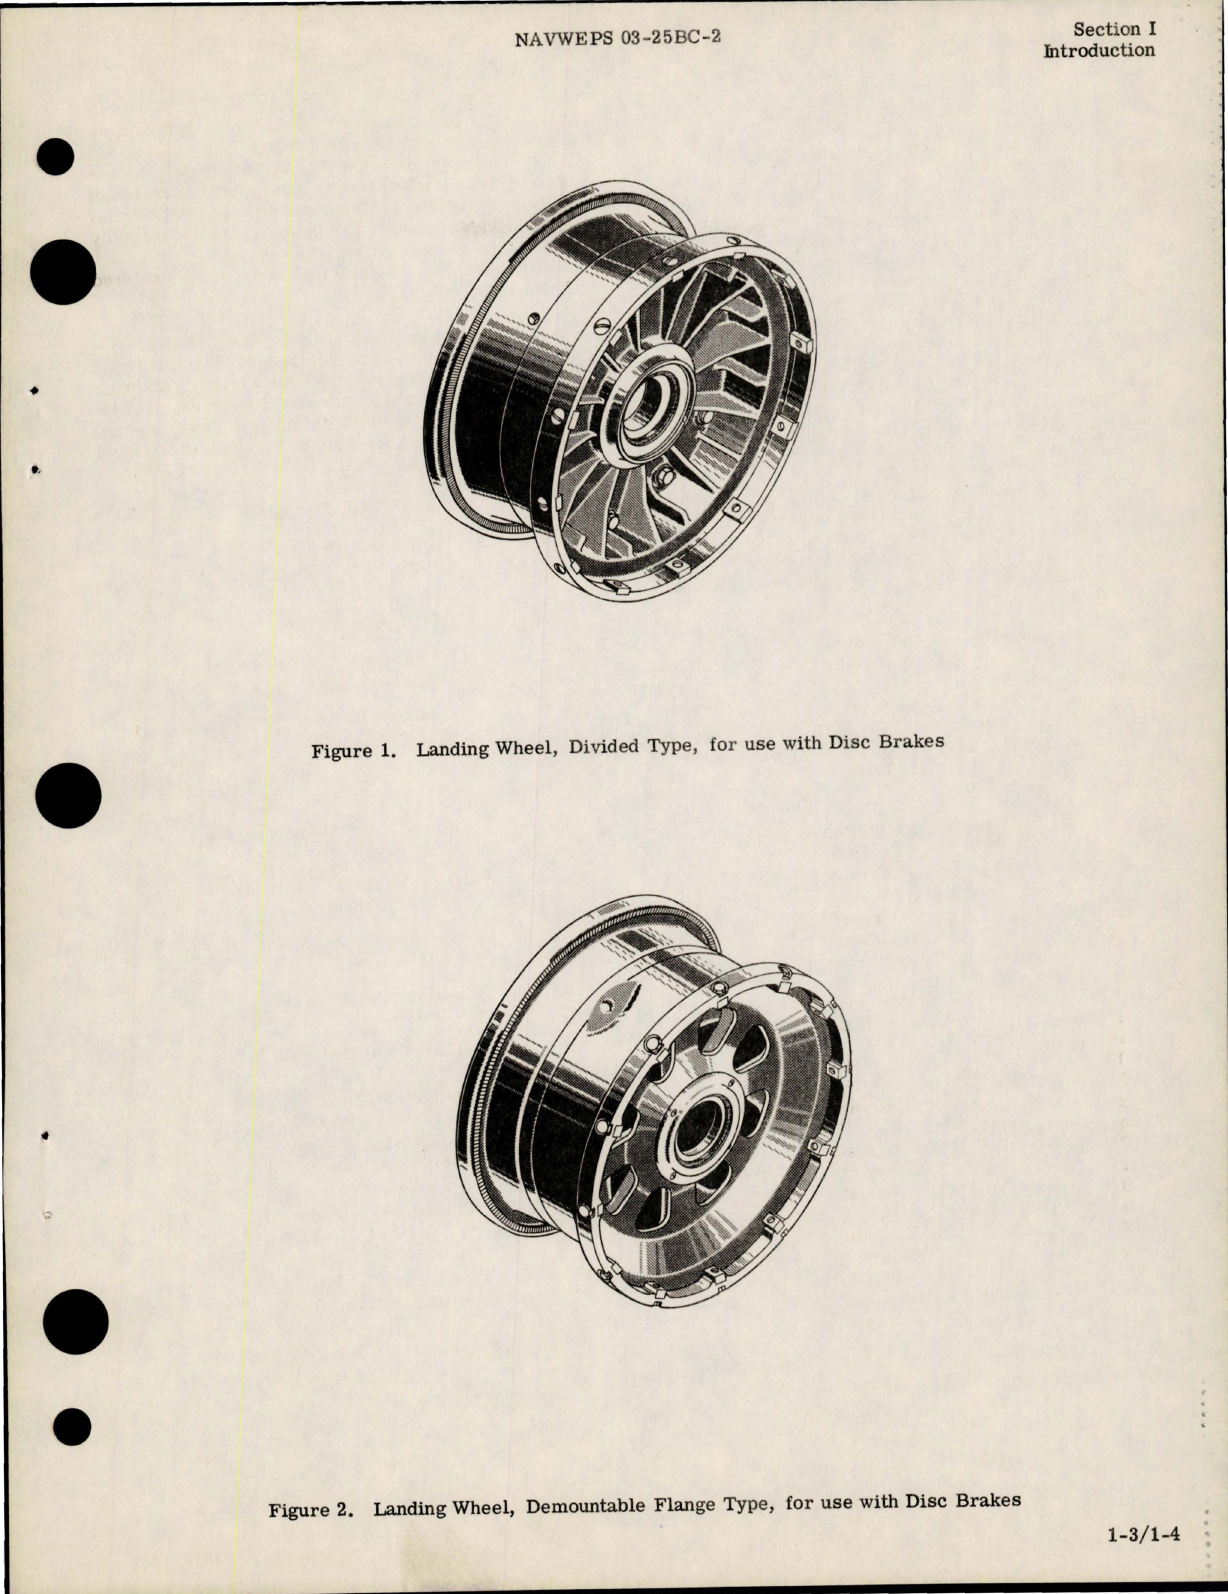 Sample page 7 from AirCorps Library document: Illustrated Parts Breakdown for Landing Wheels for use with Disc Brakes 